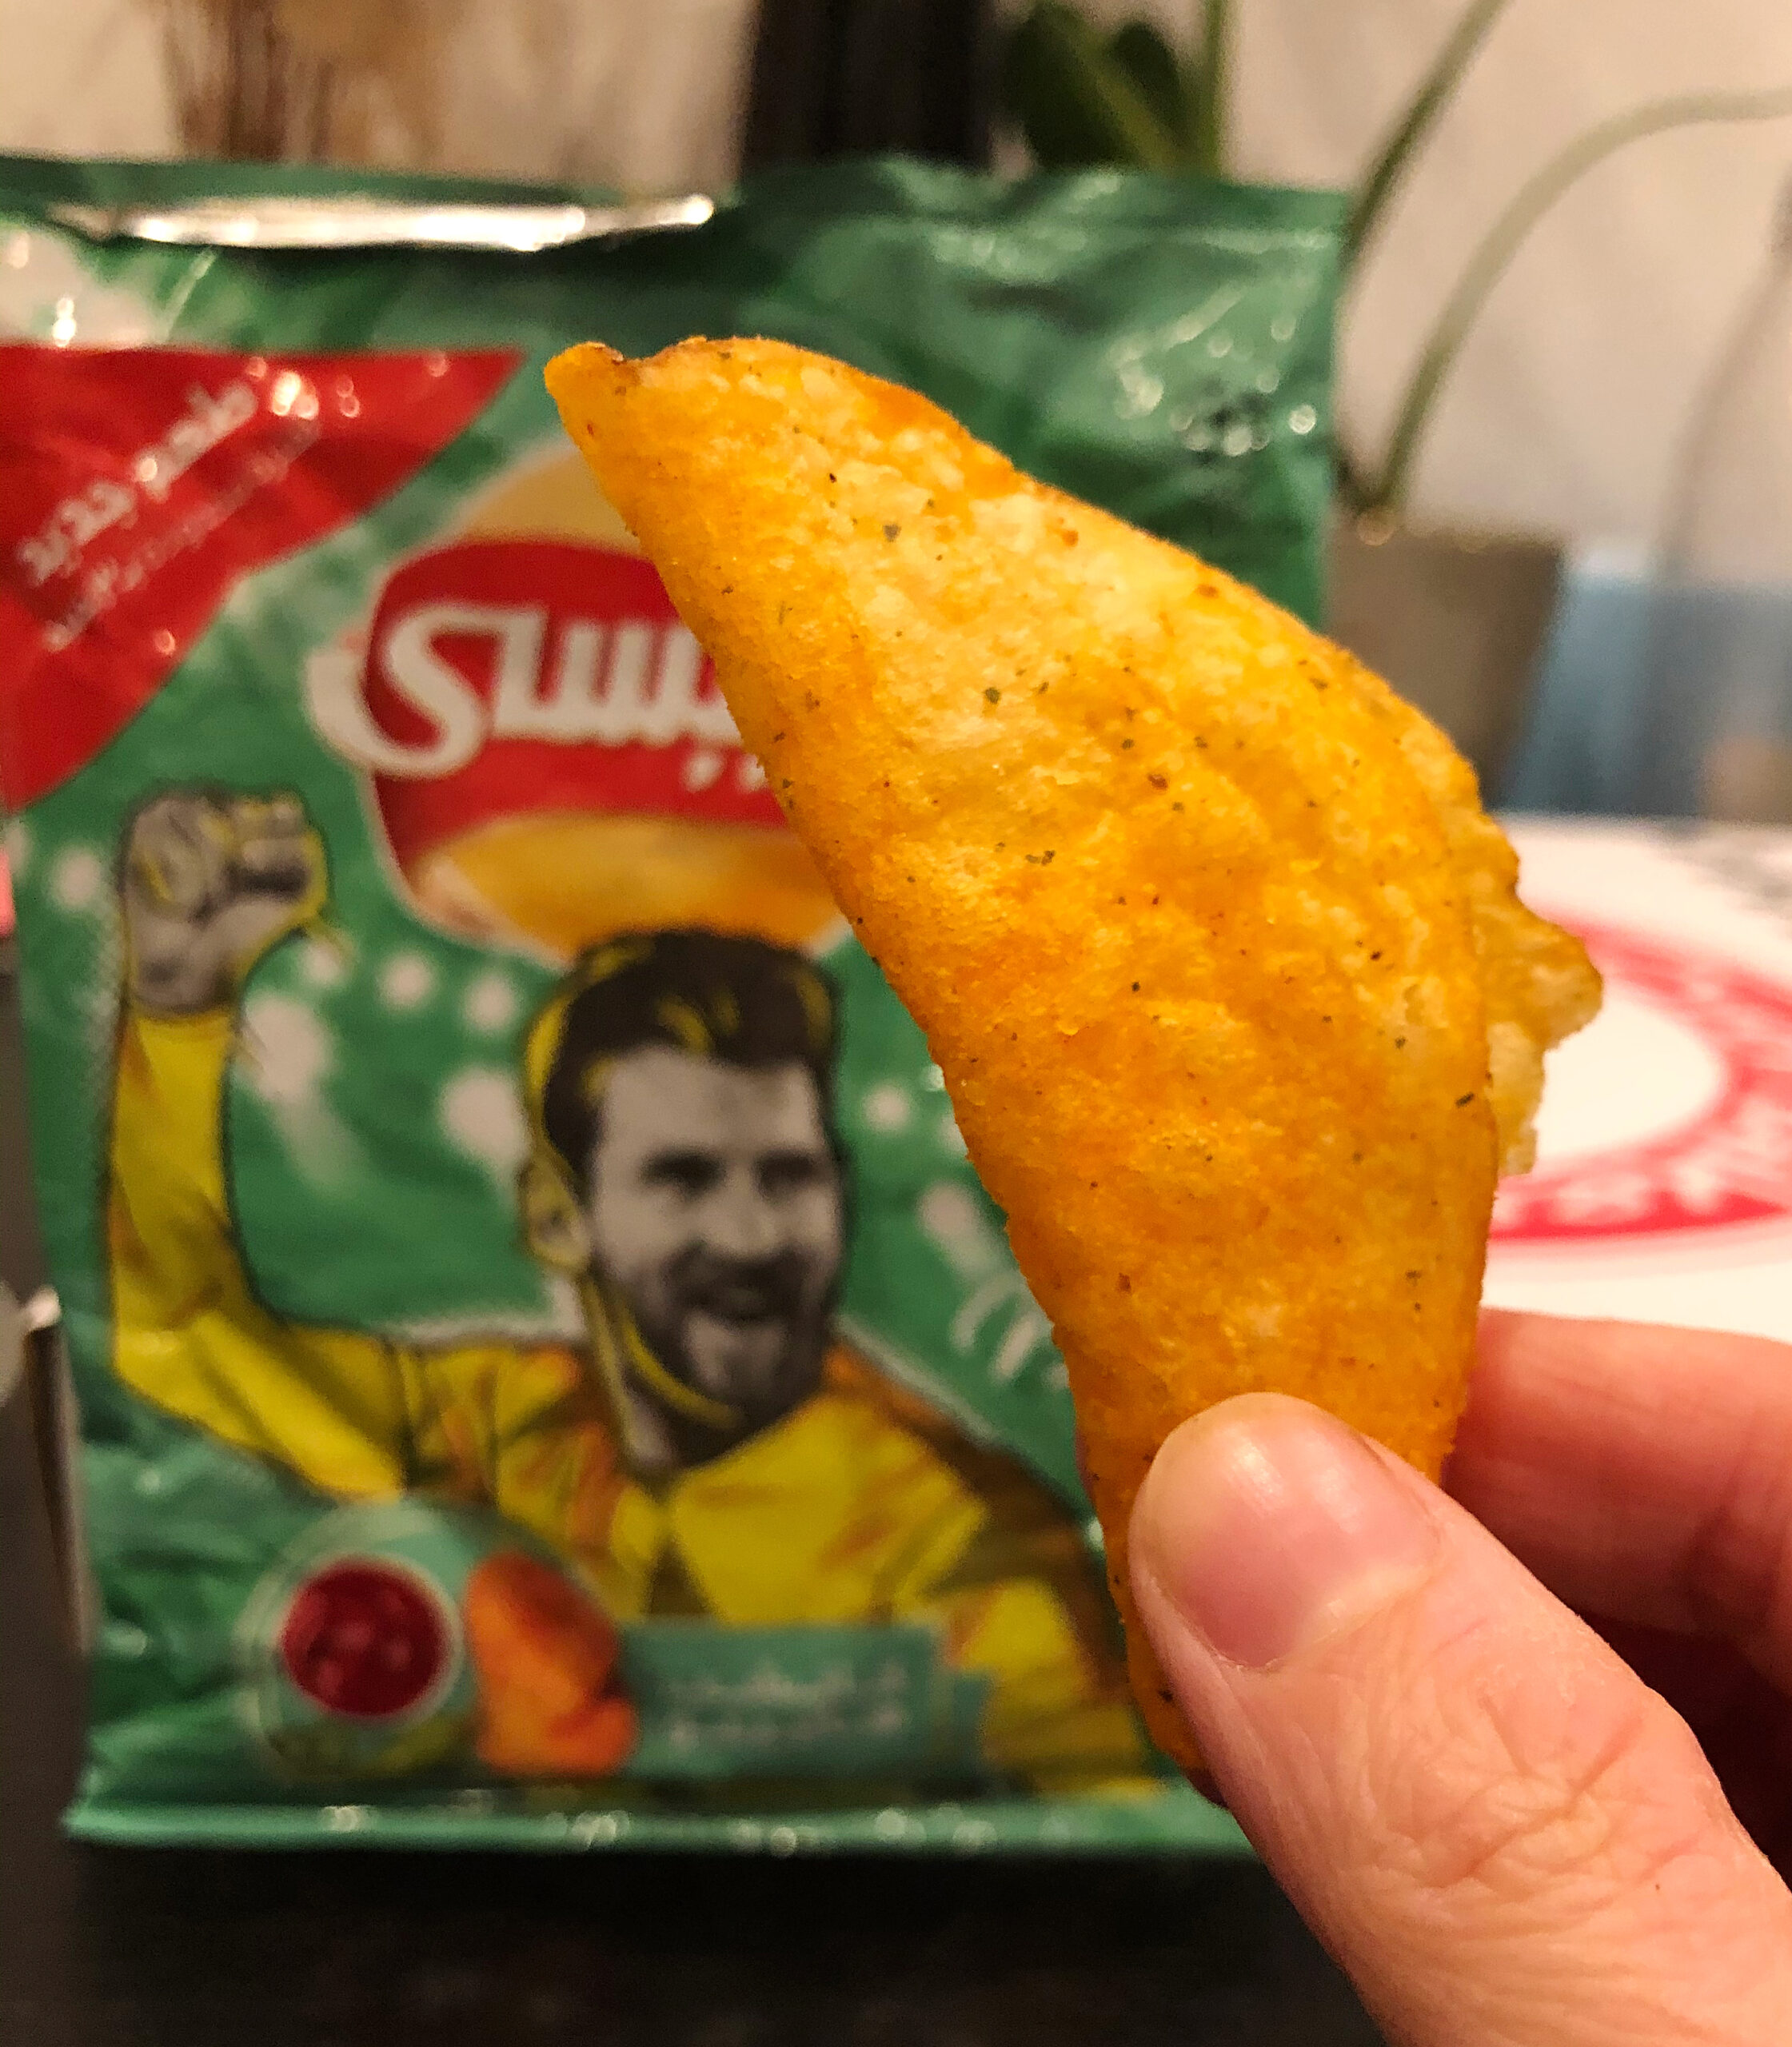 Jalapeno Ketchup Flavored Potato Chips with one chip held up in front a bag